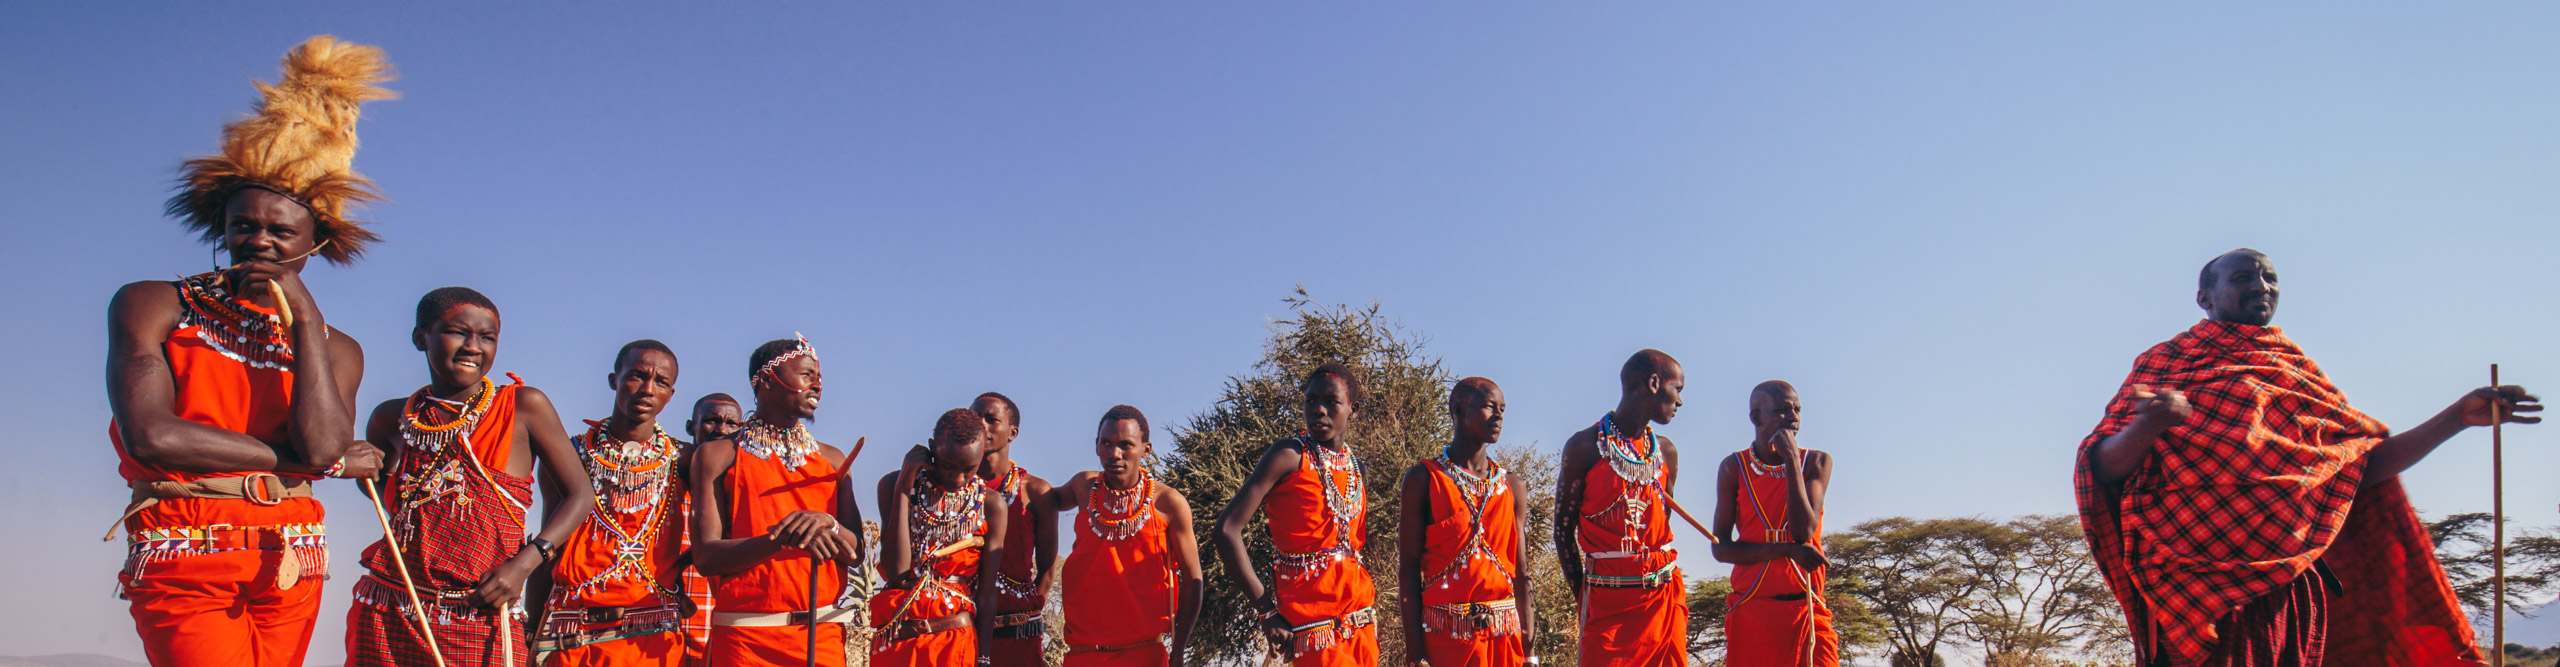 Group of Maasai tribespeople in the traditional red clothing standing in the sunshine 